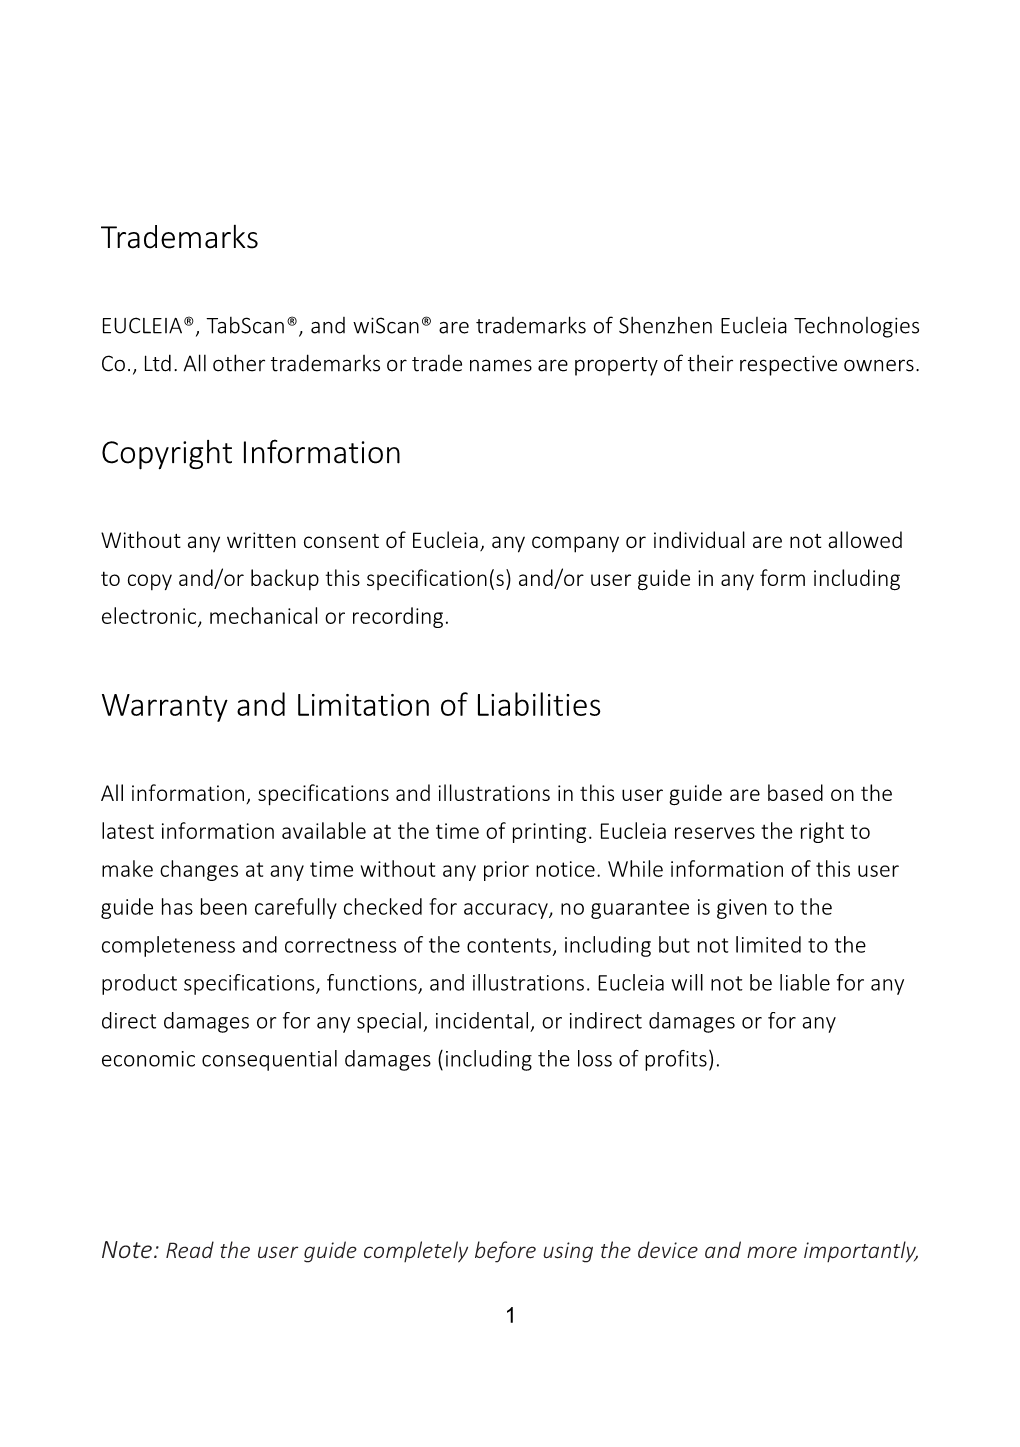 Trademarks Copyright Information Warranty and Limitation of Liabilities